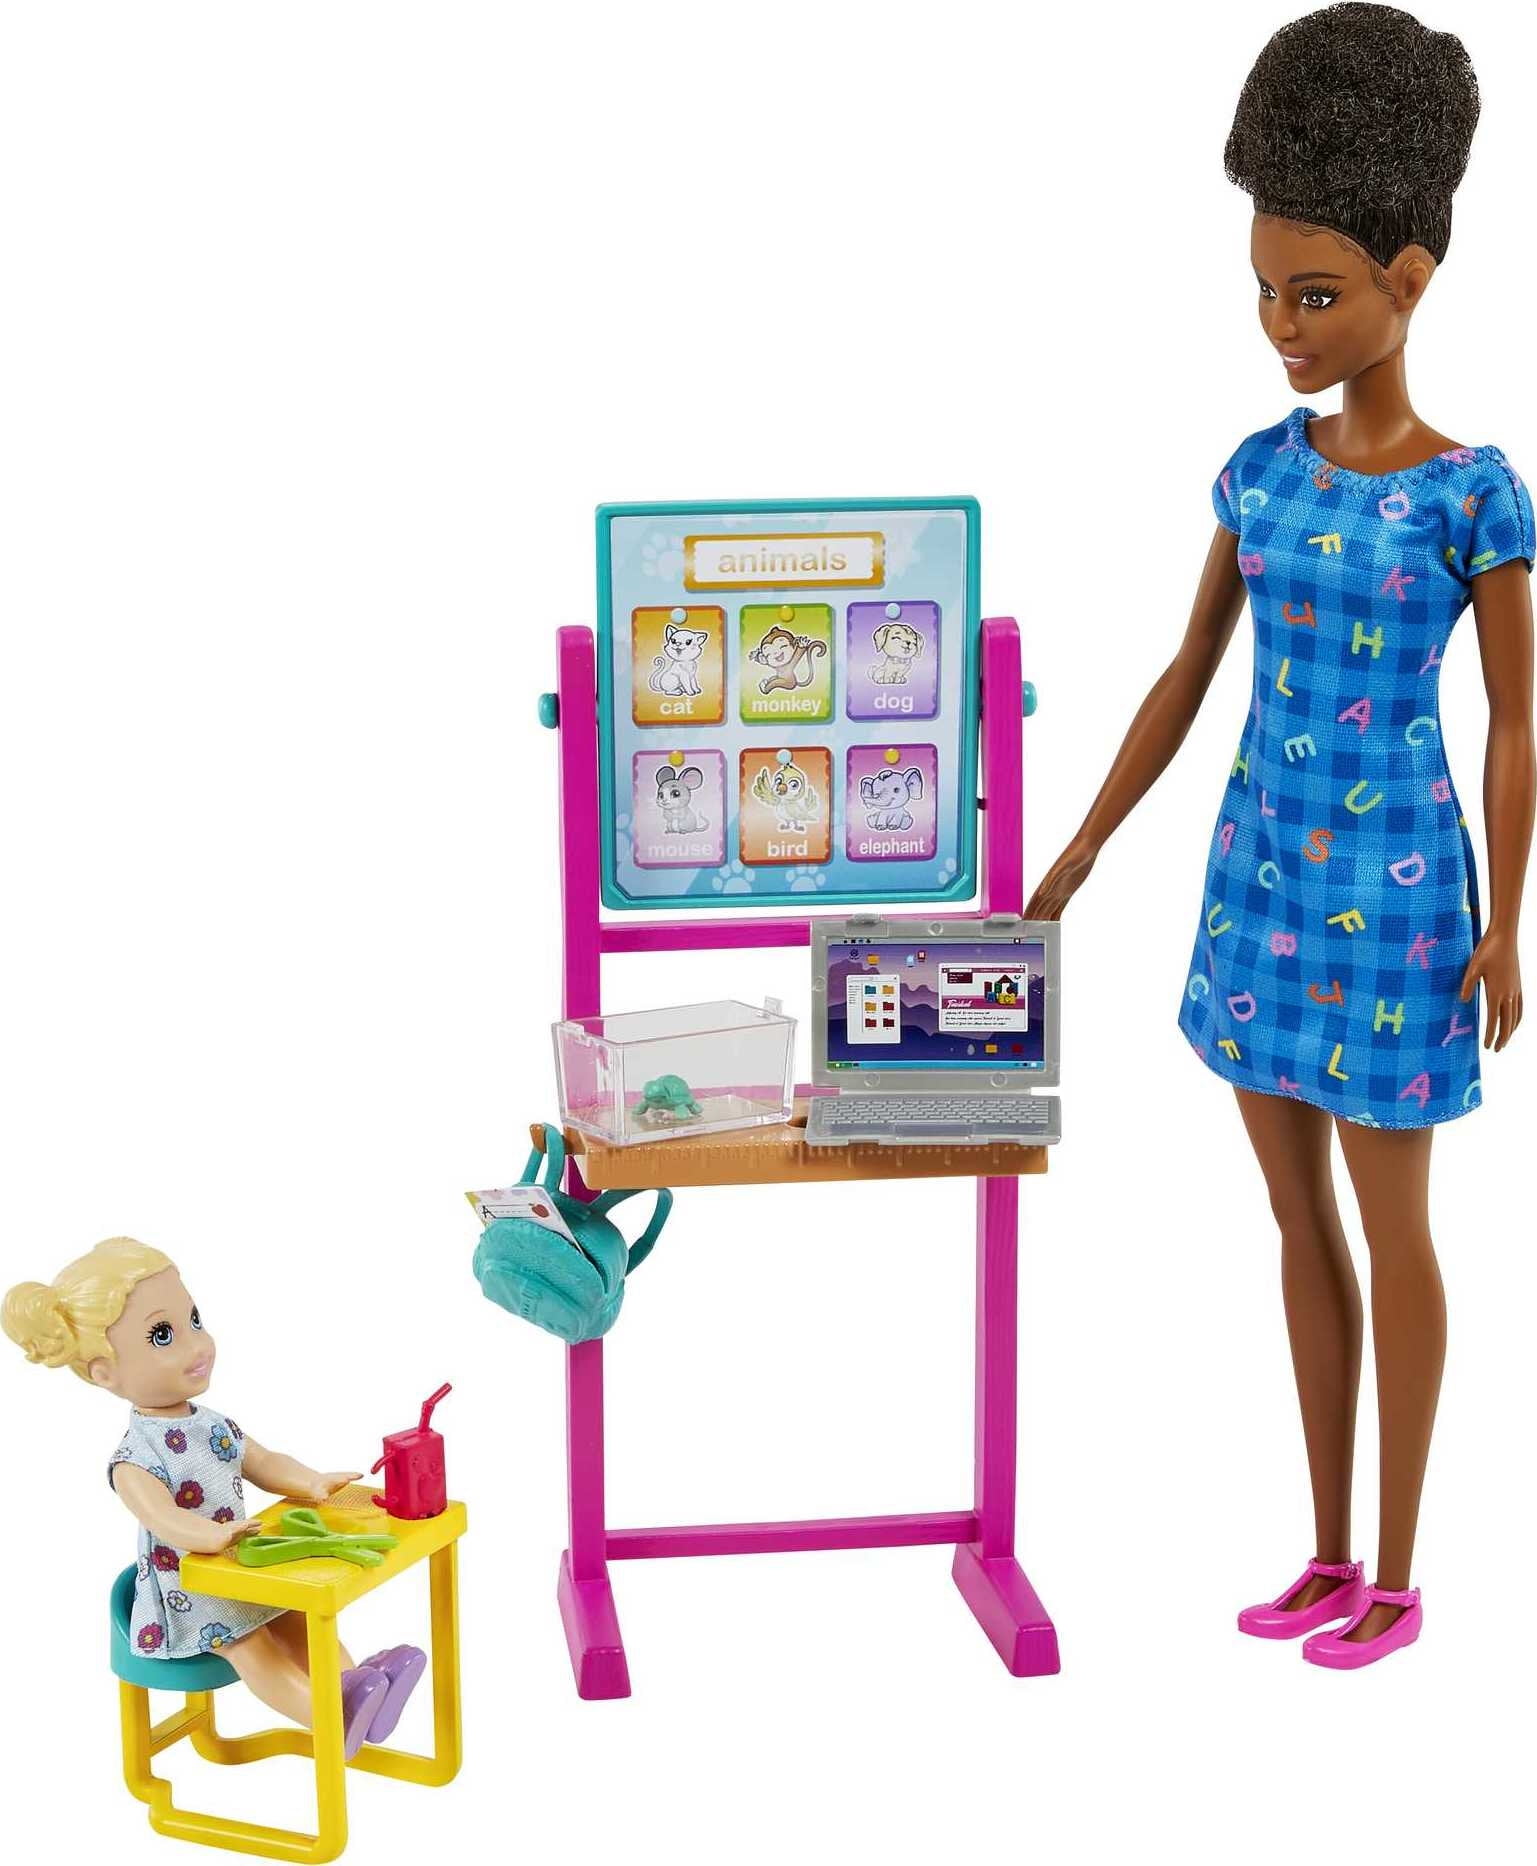 Barbie Careers Teacher Playset with Brunette Fashion Doll, 1 Small Doll, Furniture & Accessories